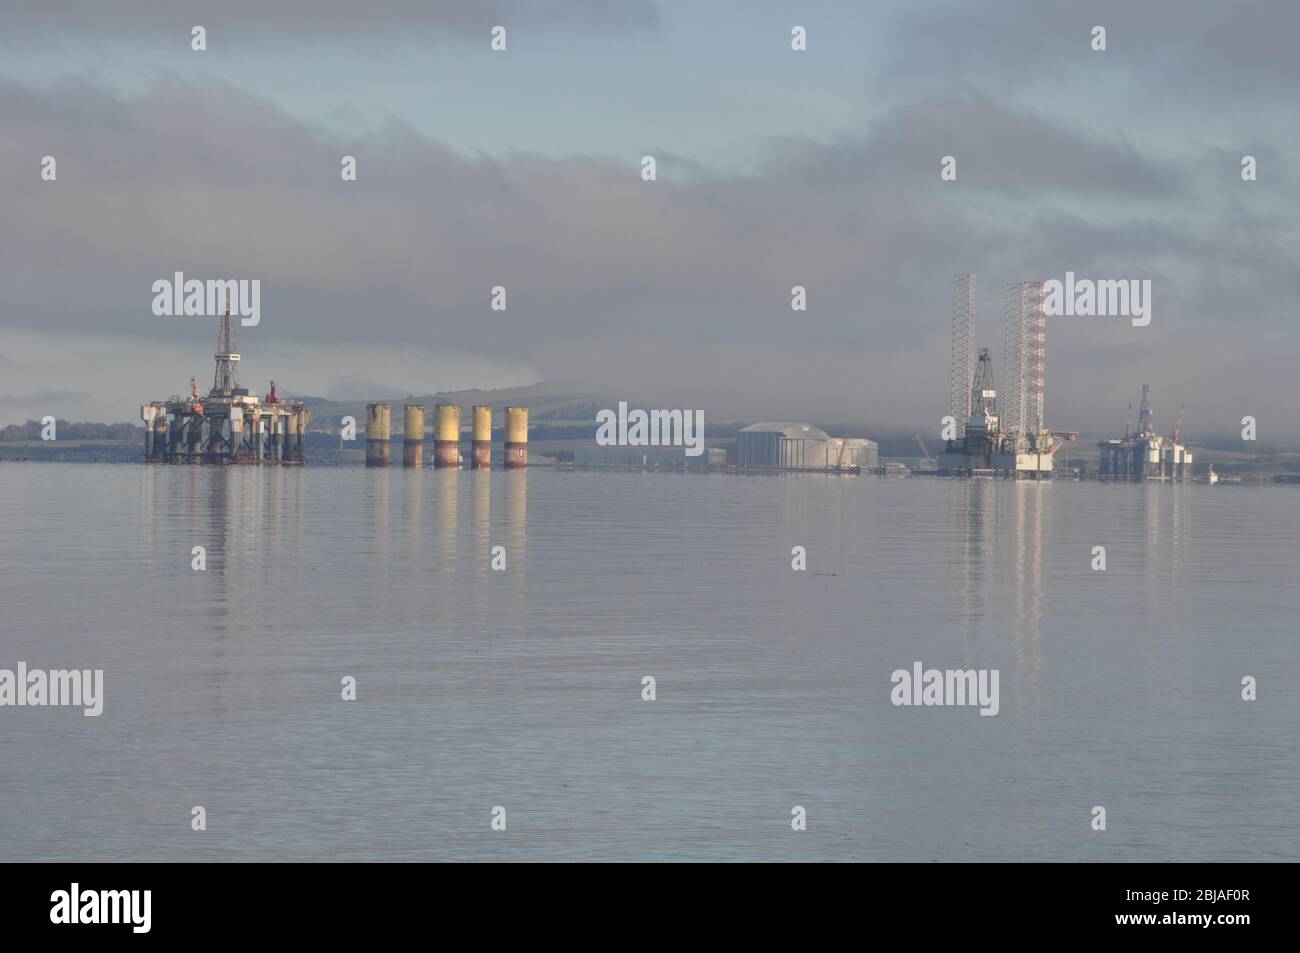 Oil Rigs in the Cromarty Firth, Scotland viewed from Balblair Stock Photo